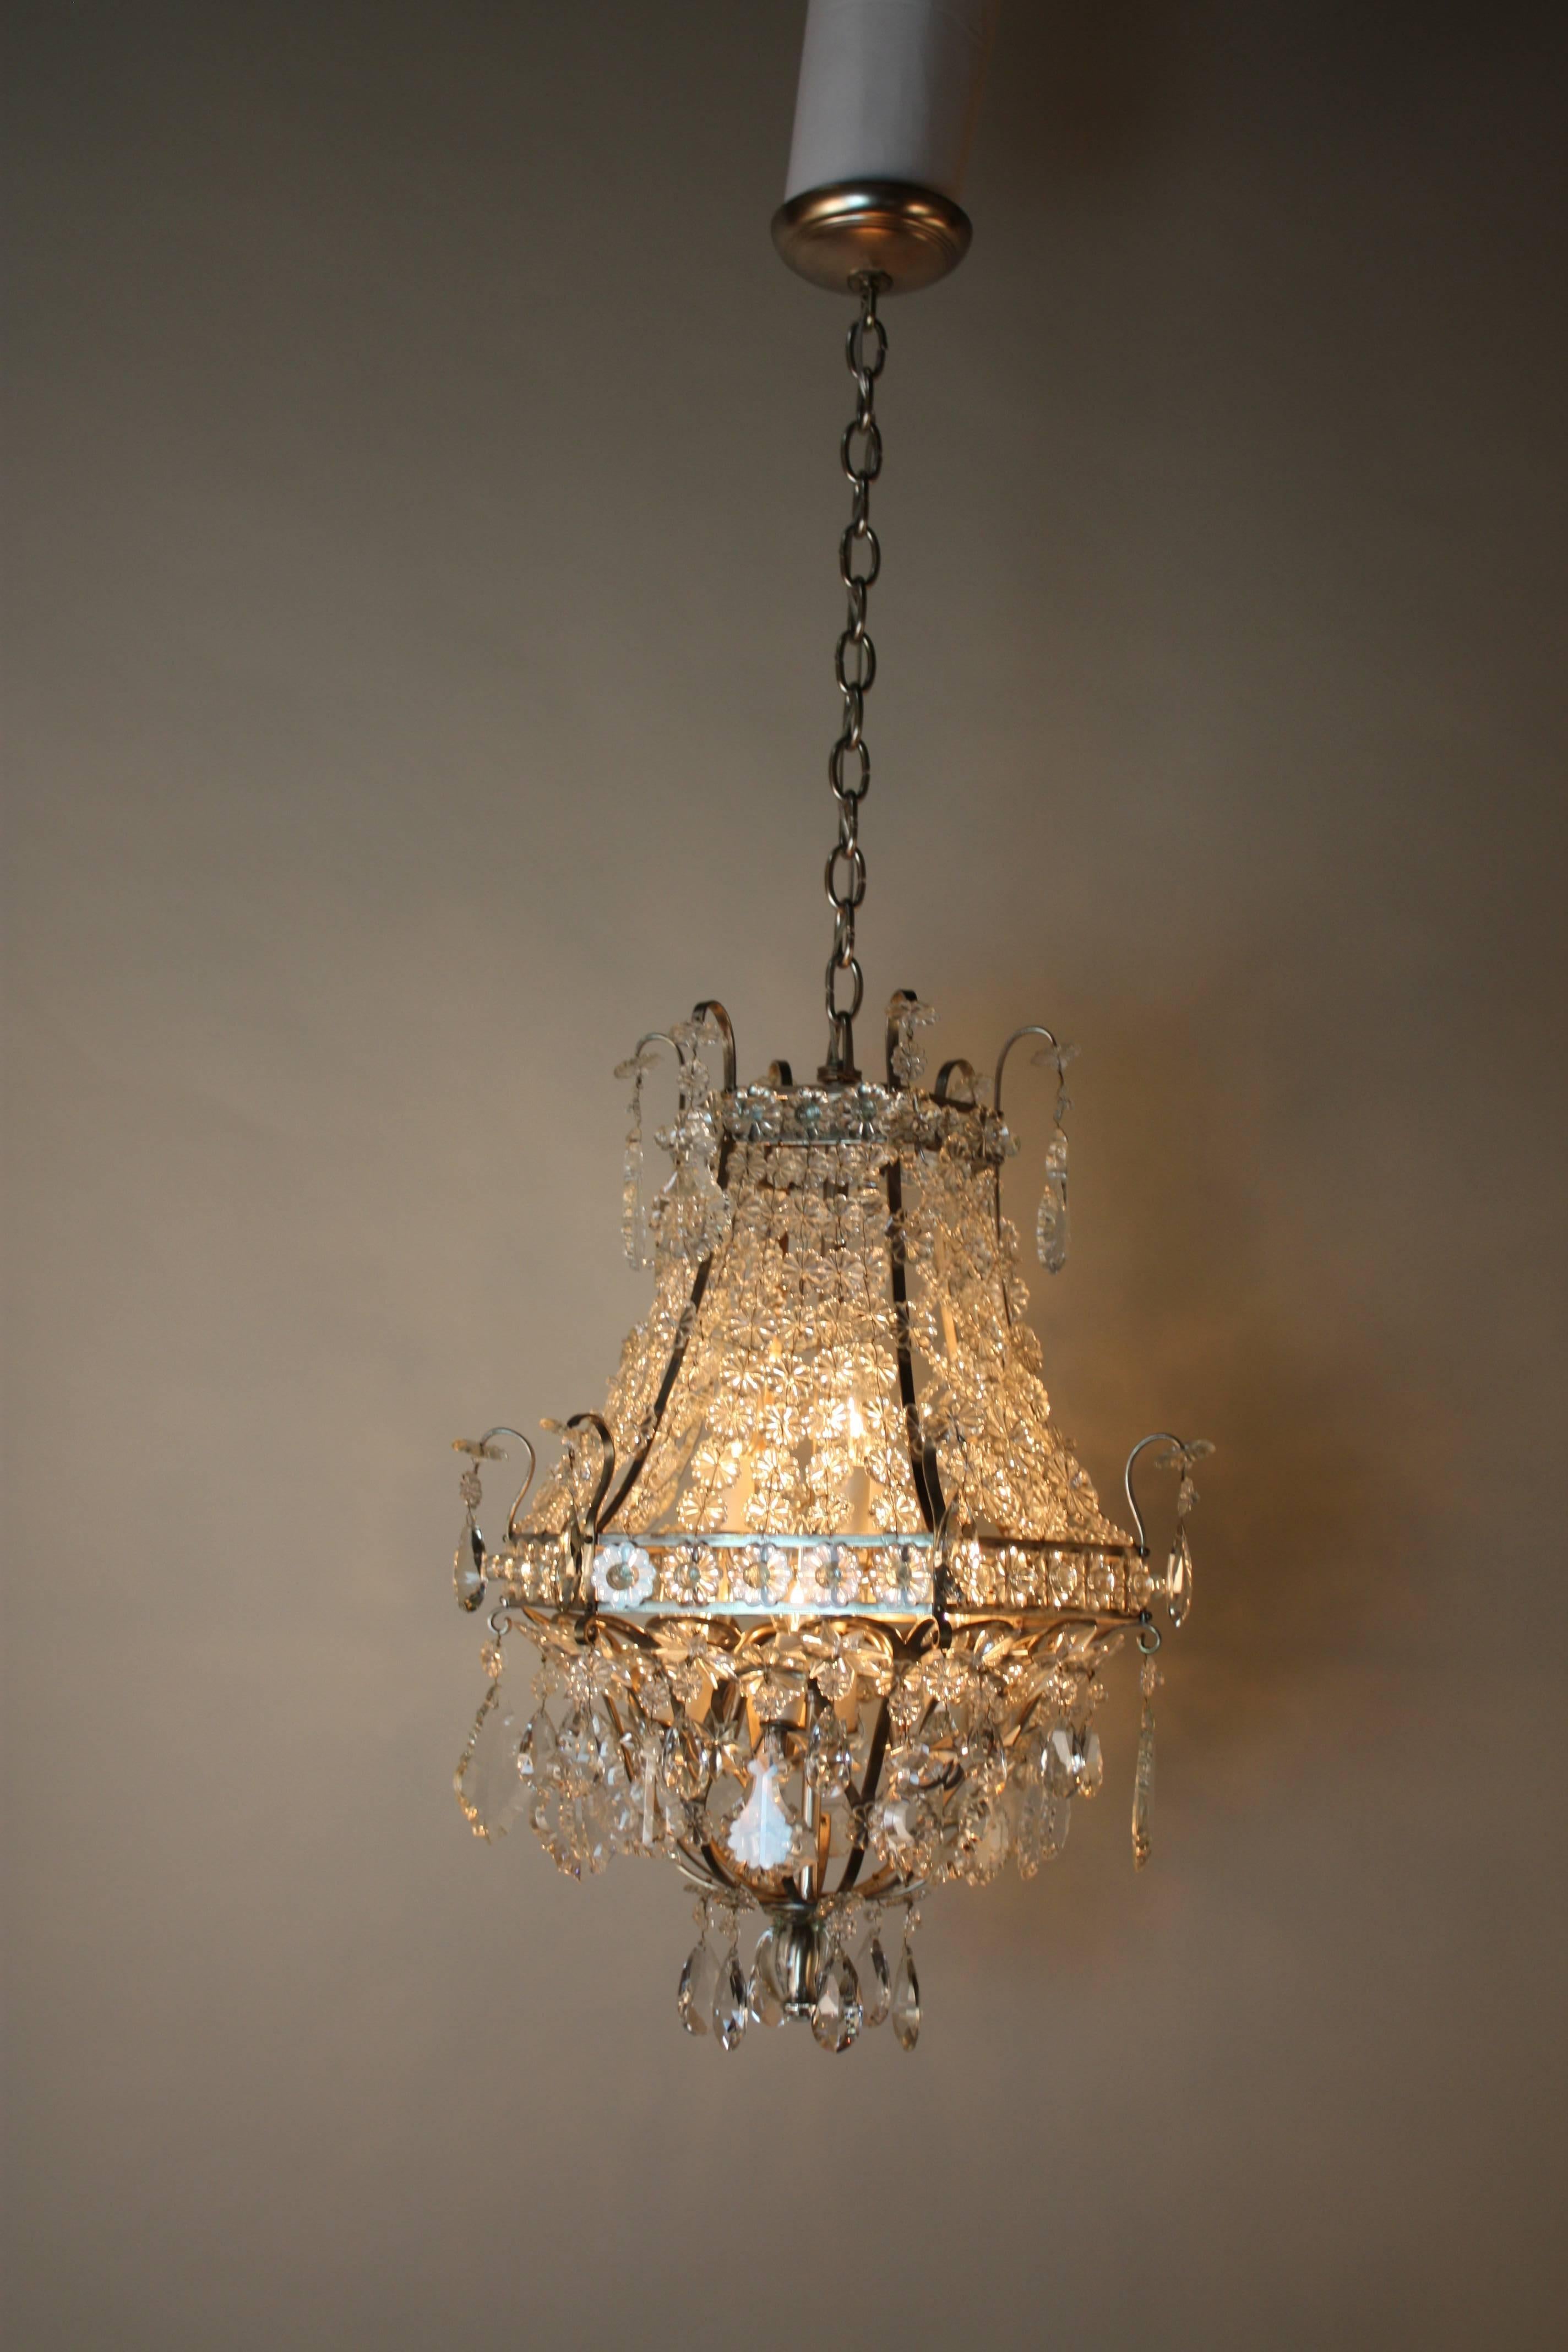 Hundreds of individually placed crystals ornately adorn this gorgeous nine-light chandelier from top to bottom. Handcrafted in Italy during the 1950s, this Mid-Century fixture features a wonderful nickel on bronze design.